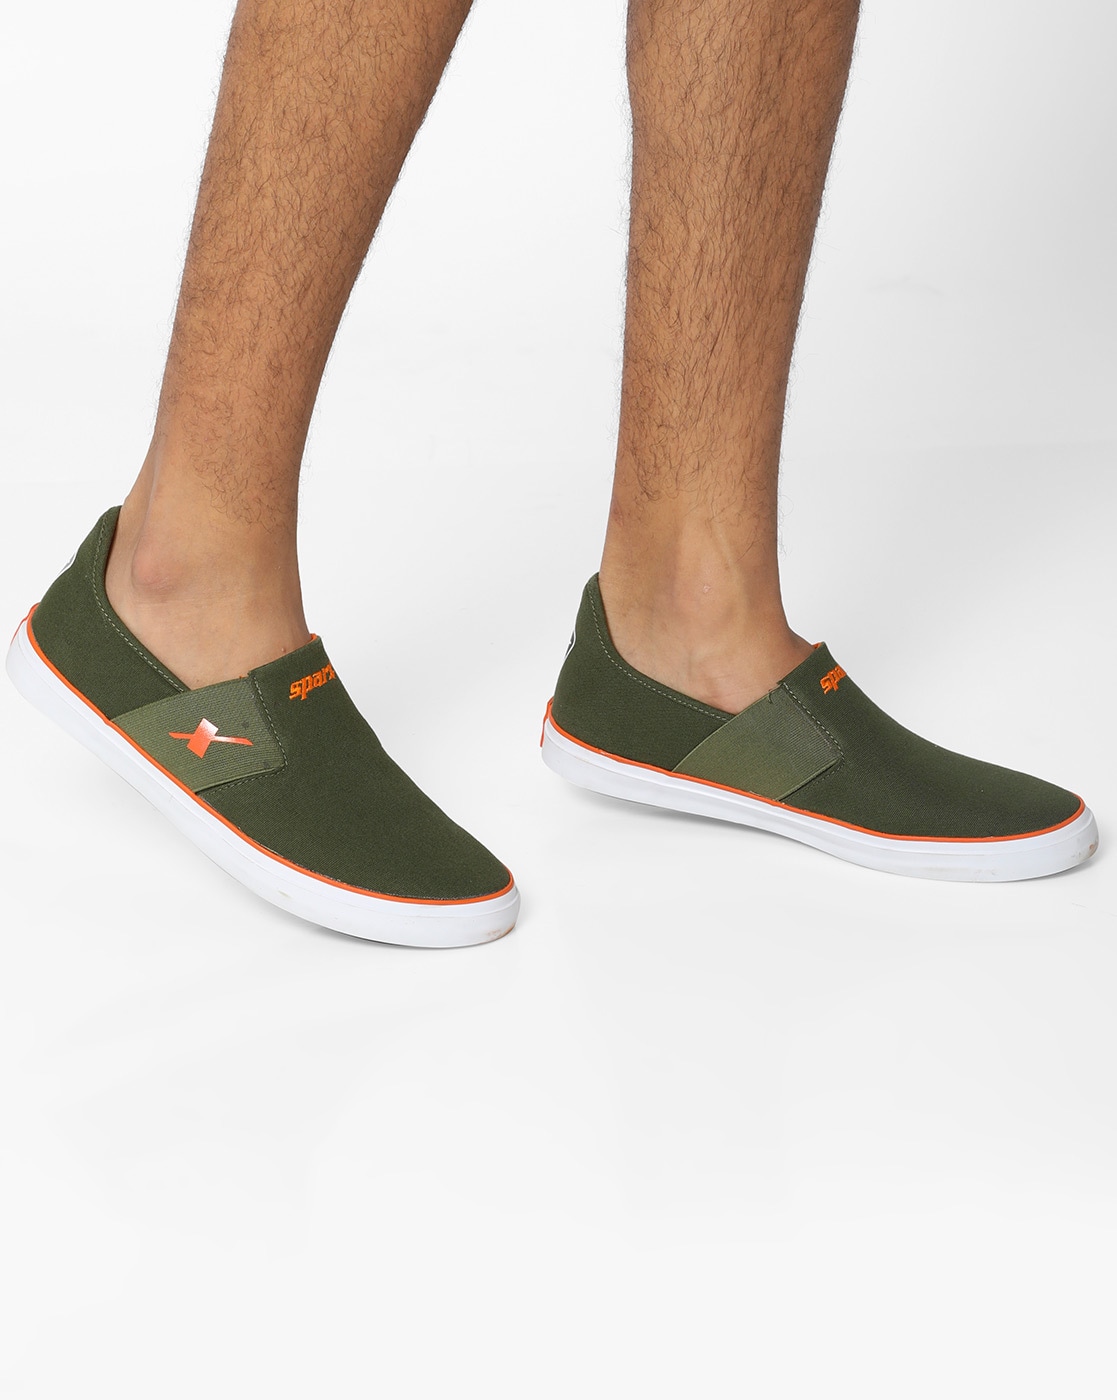 sparx olive green canvas shoes